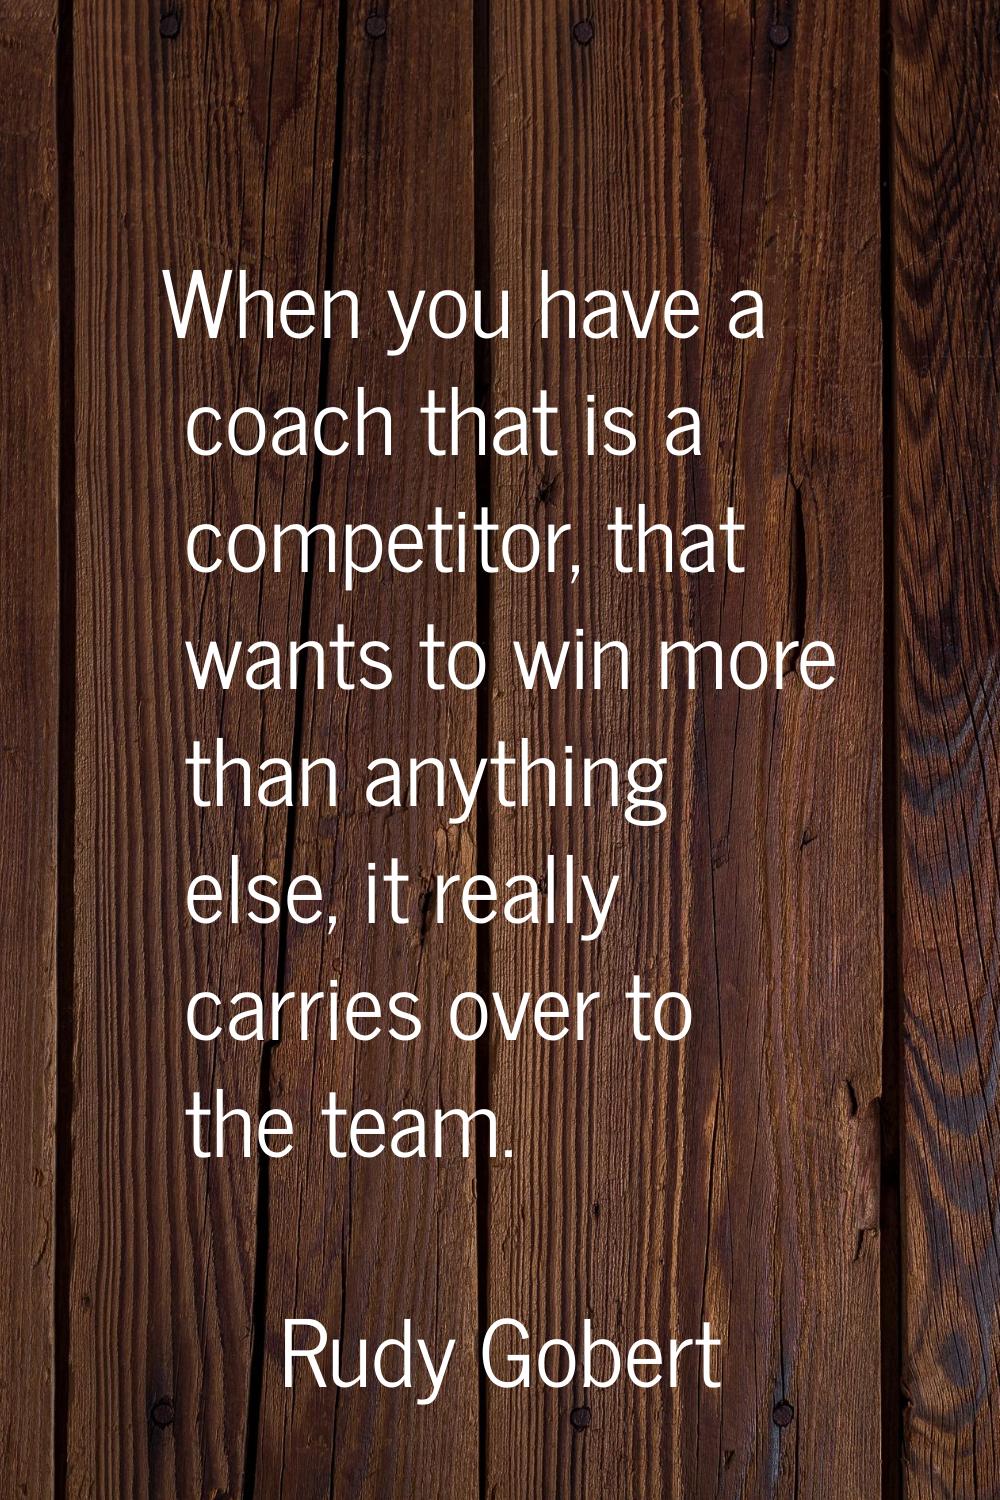 When you have a coach that is a competitor, that wants to win more than anything else, it really ca